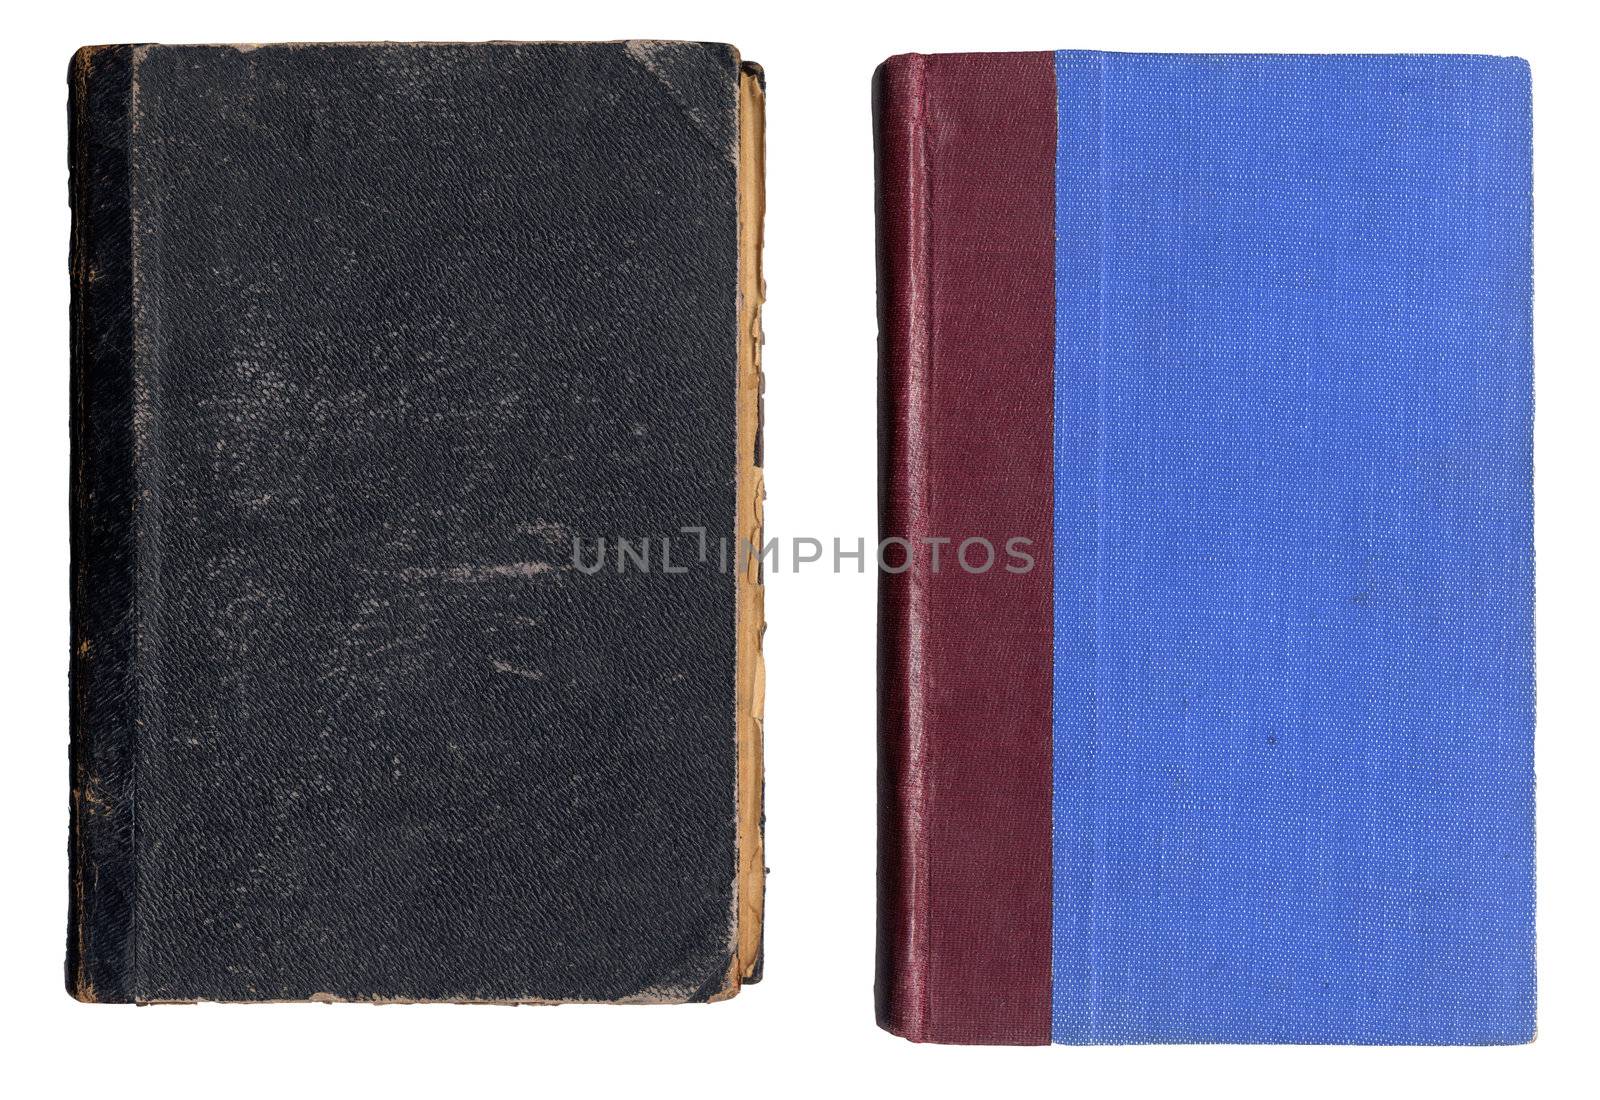 Black And Cyan Old Book Covers Isolated On White Background